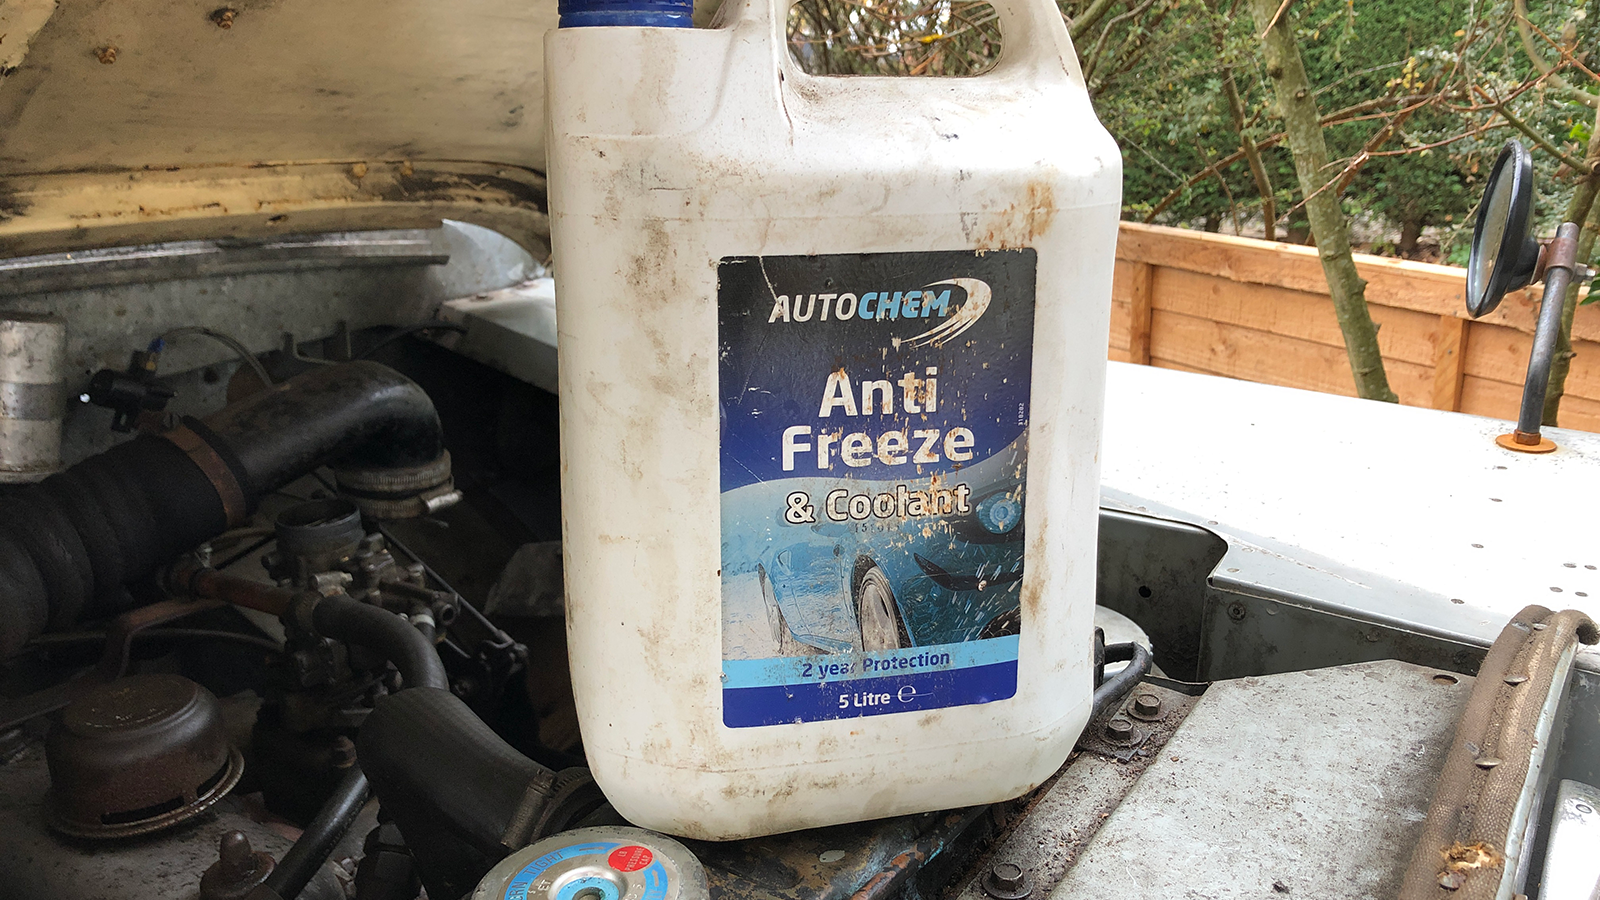 Winter is coming: how to keep your classic safe in cold weather